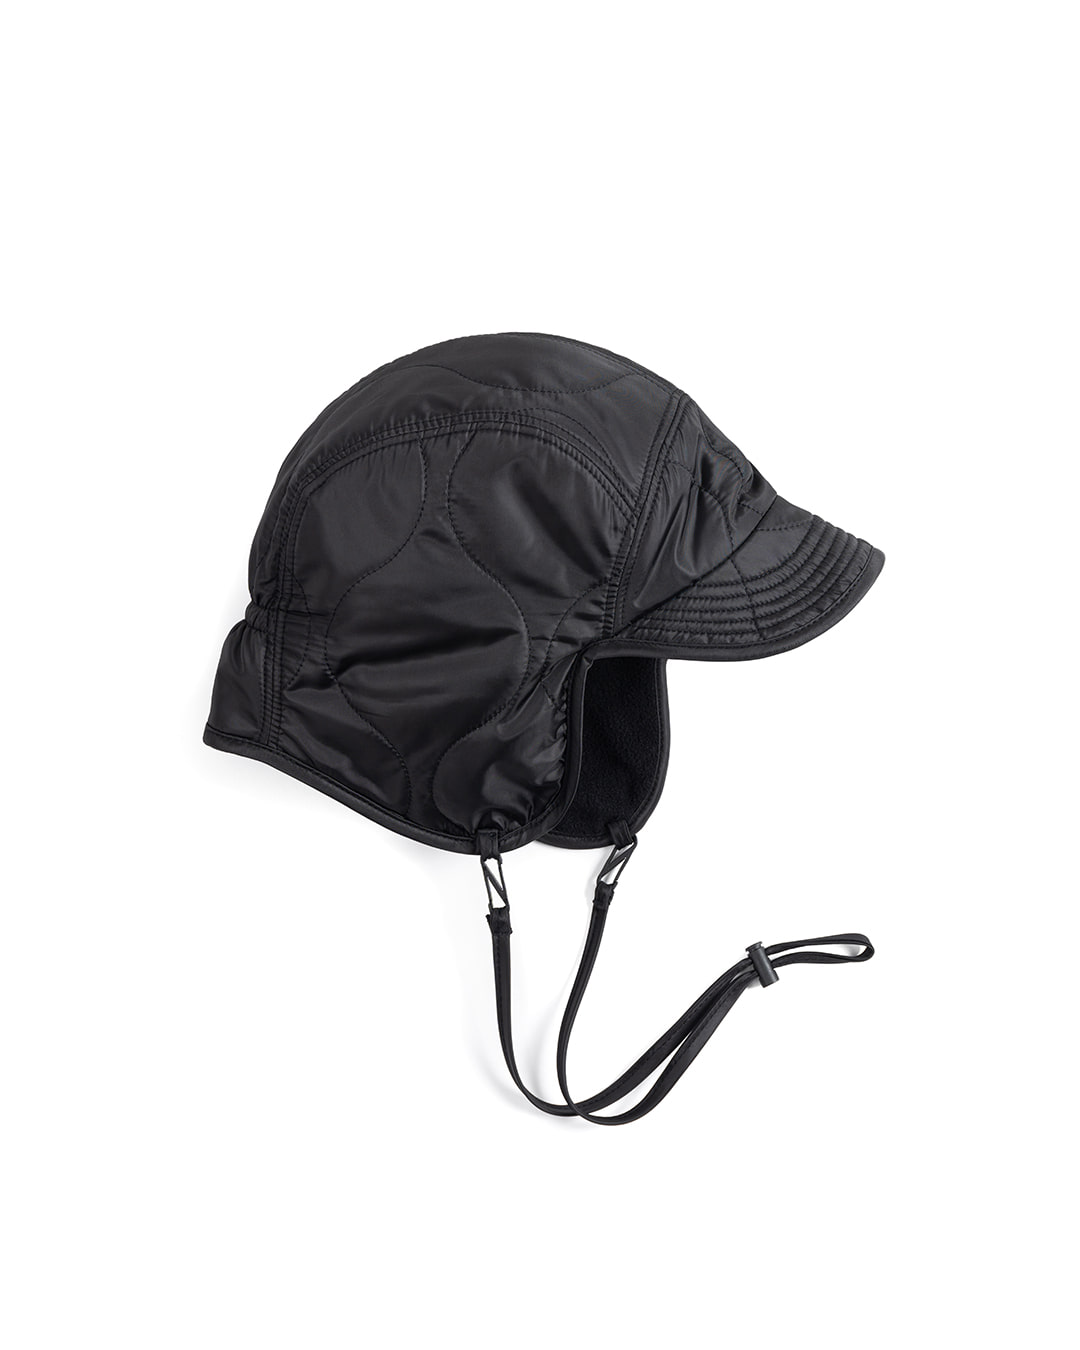 MS QUILTED FIELD CAP (black)